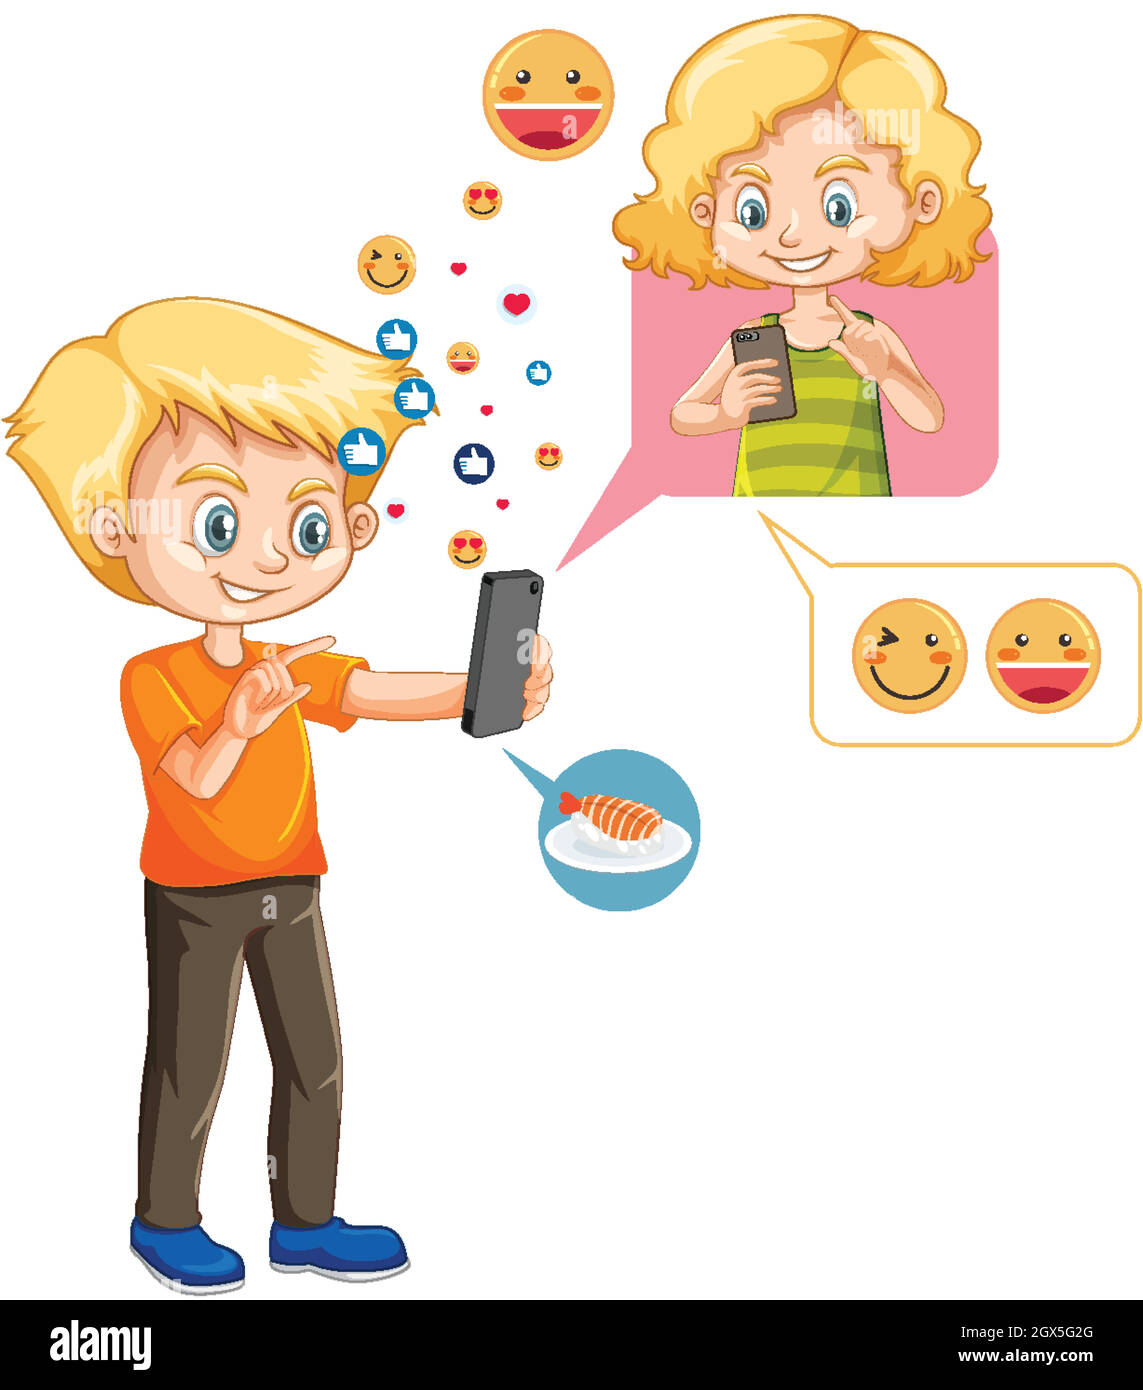 Boy chatting with friend on smartphone with emoji icon cartoon style isolated on white background Stock Vector